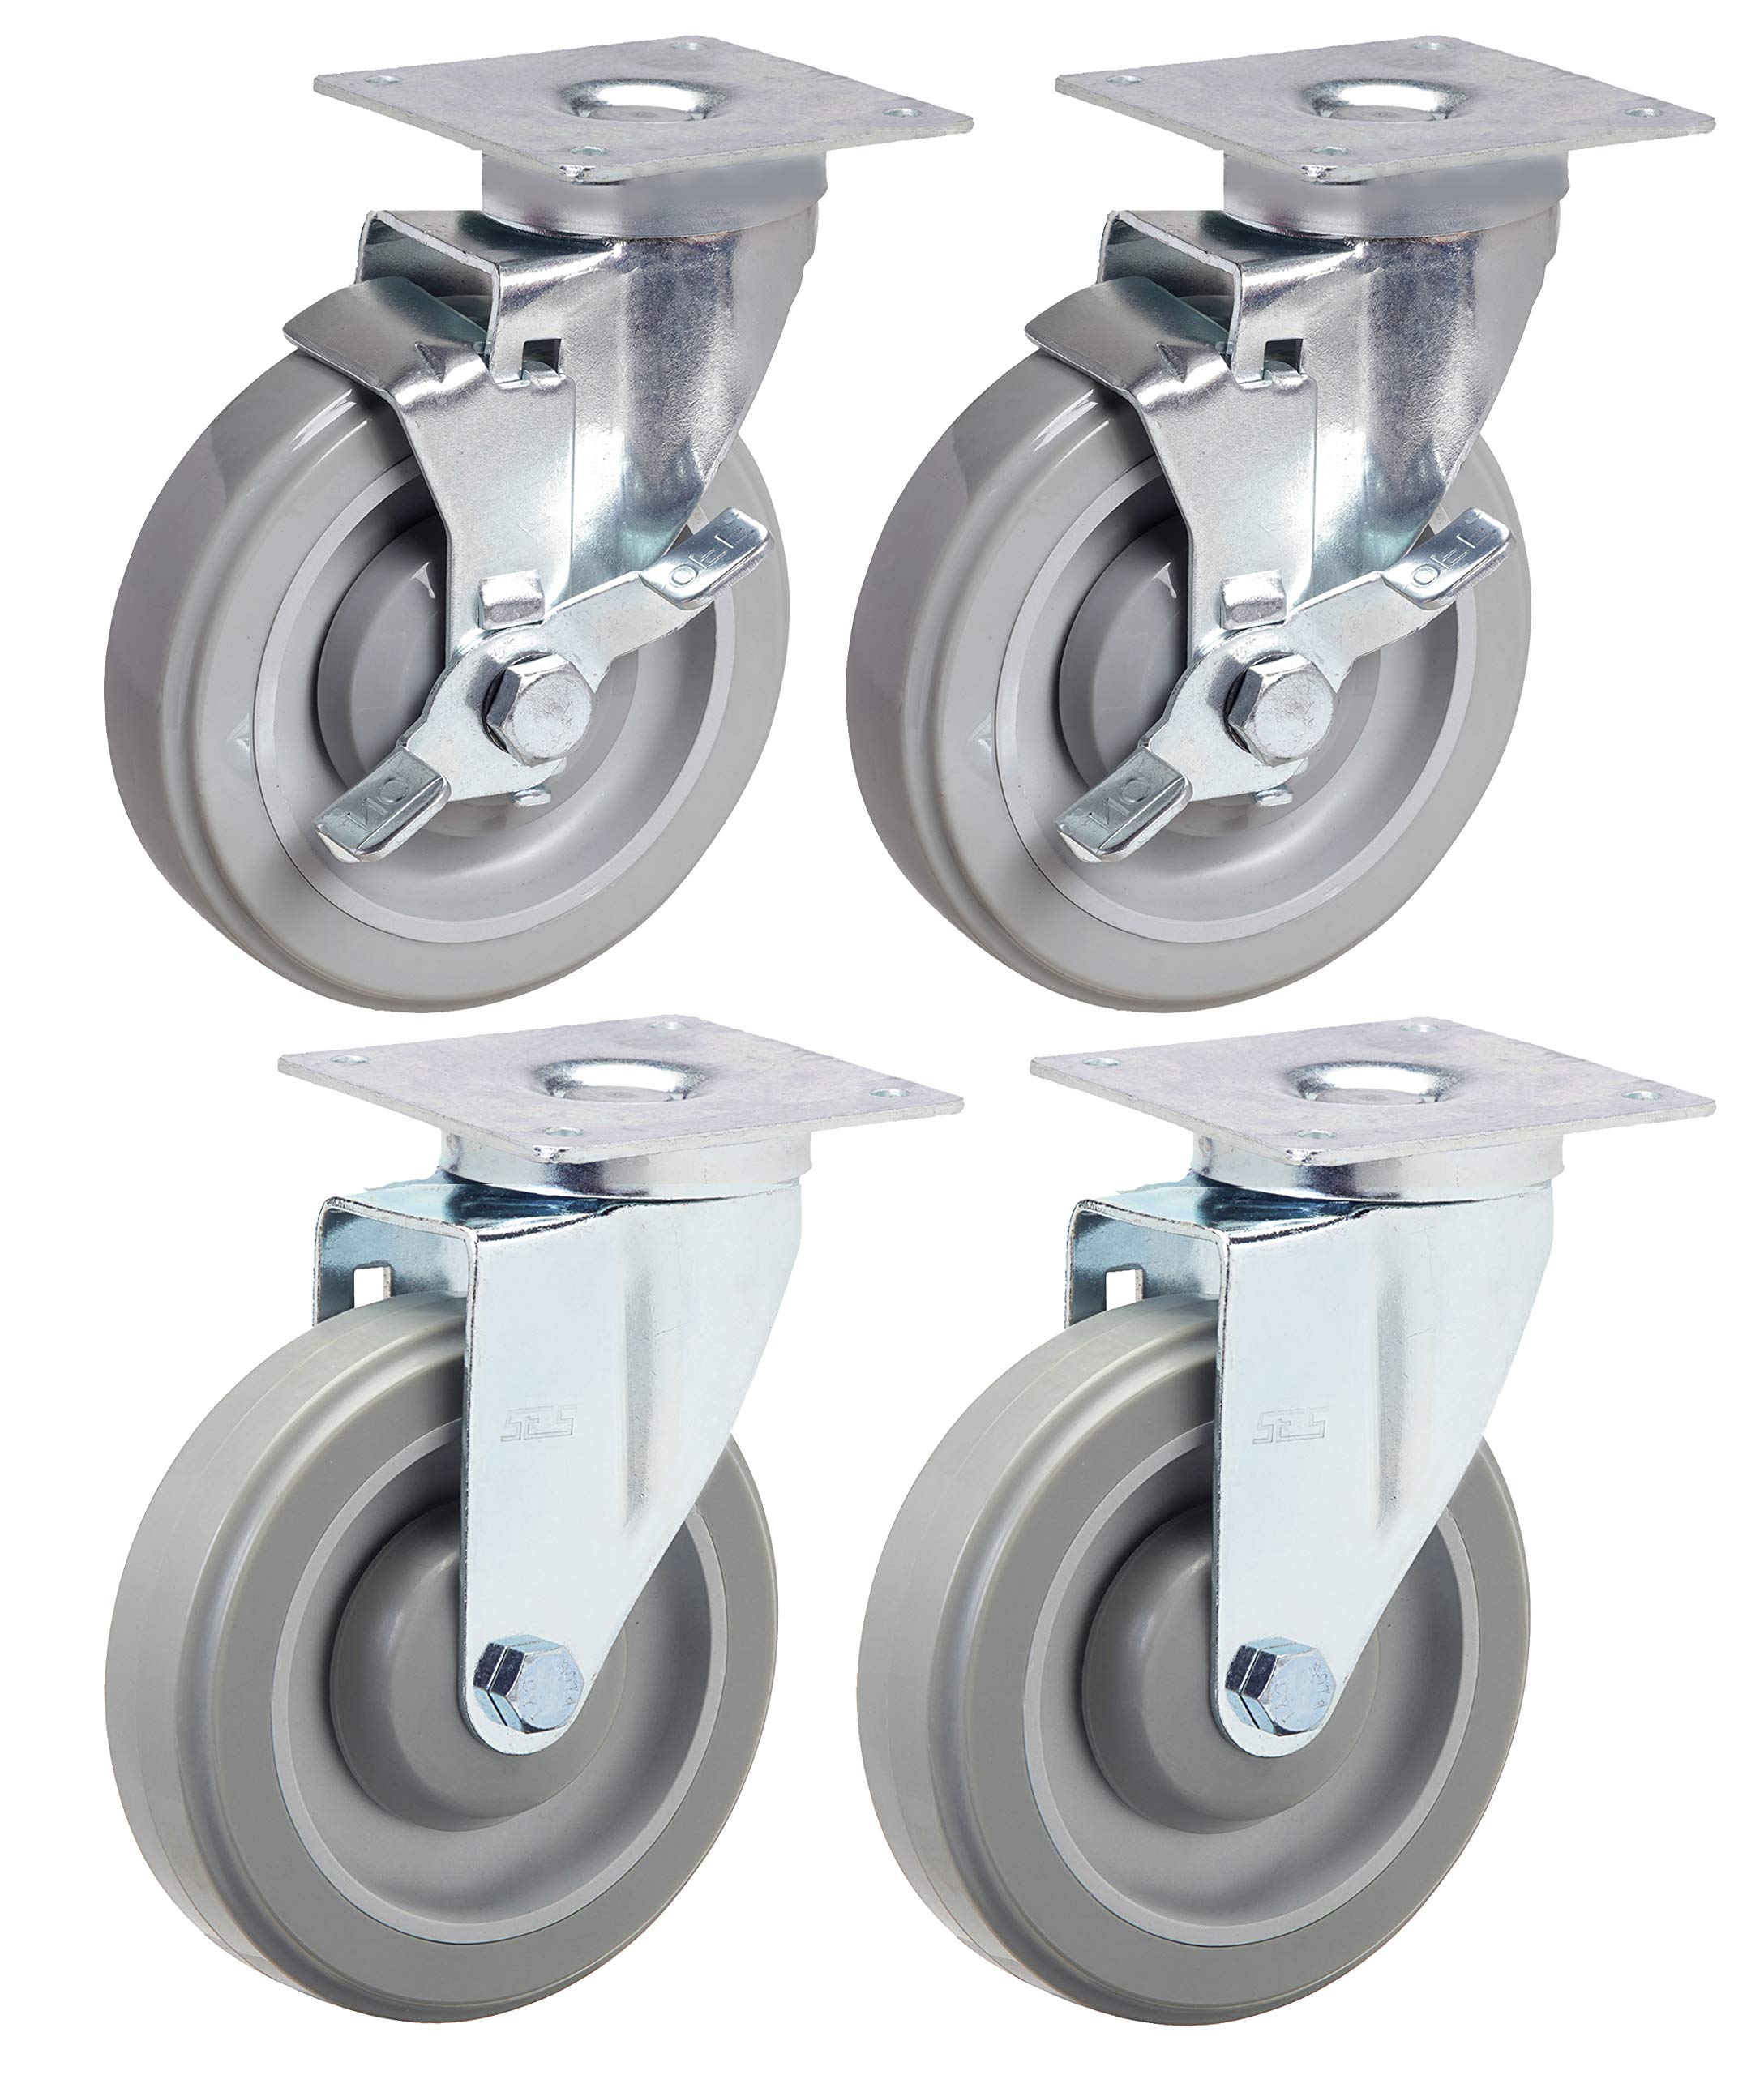 SES cASTERS STANLEY  5 Caster Set Of 4  For Vulcan Range With Polyurethane Wheels  2 Swivels And 2 Swivels With Brake